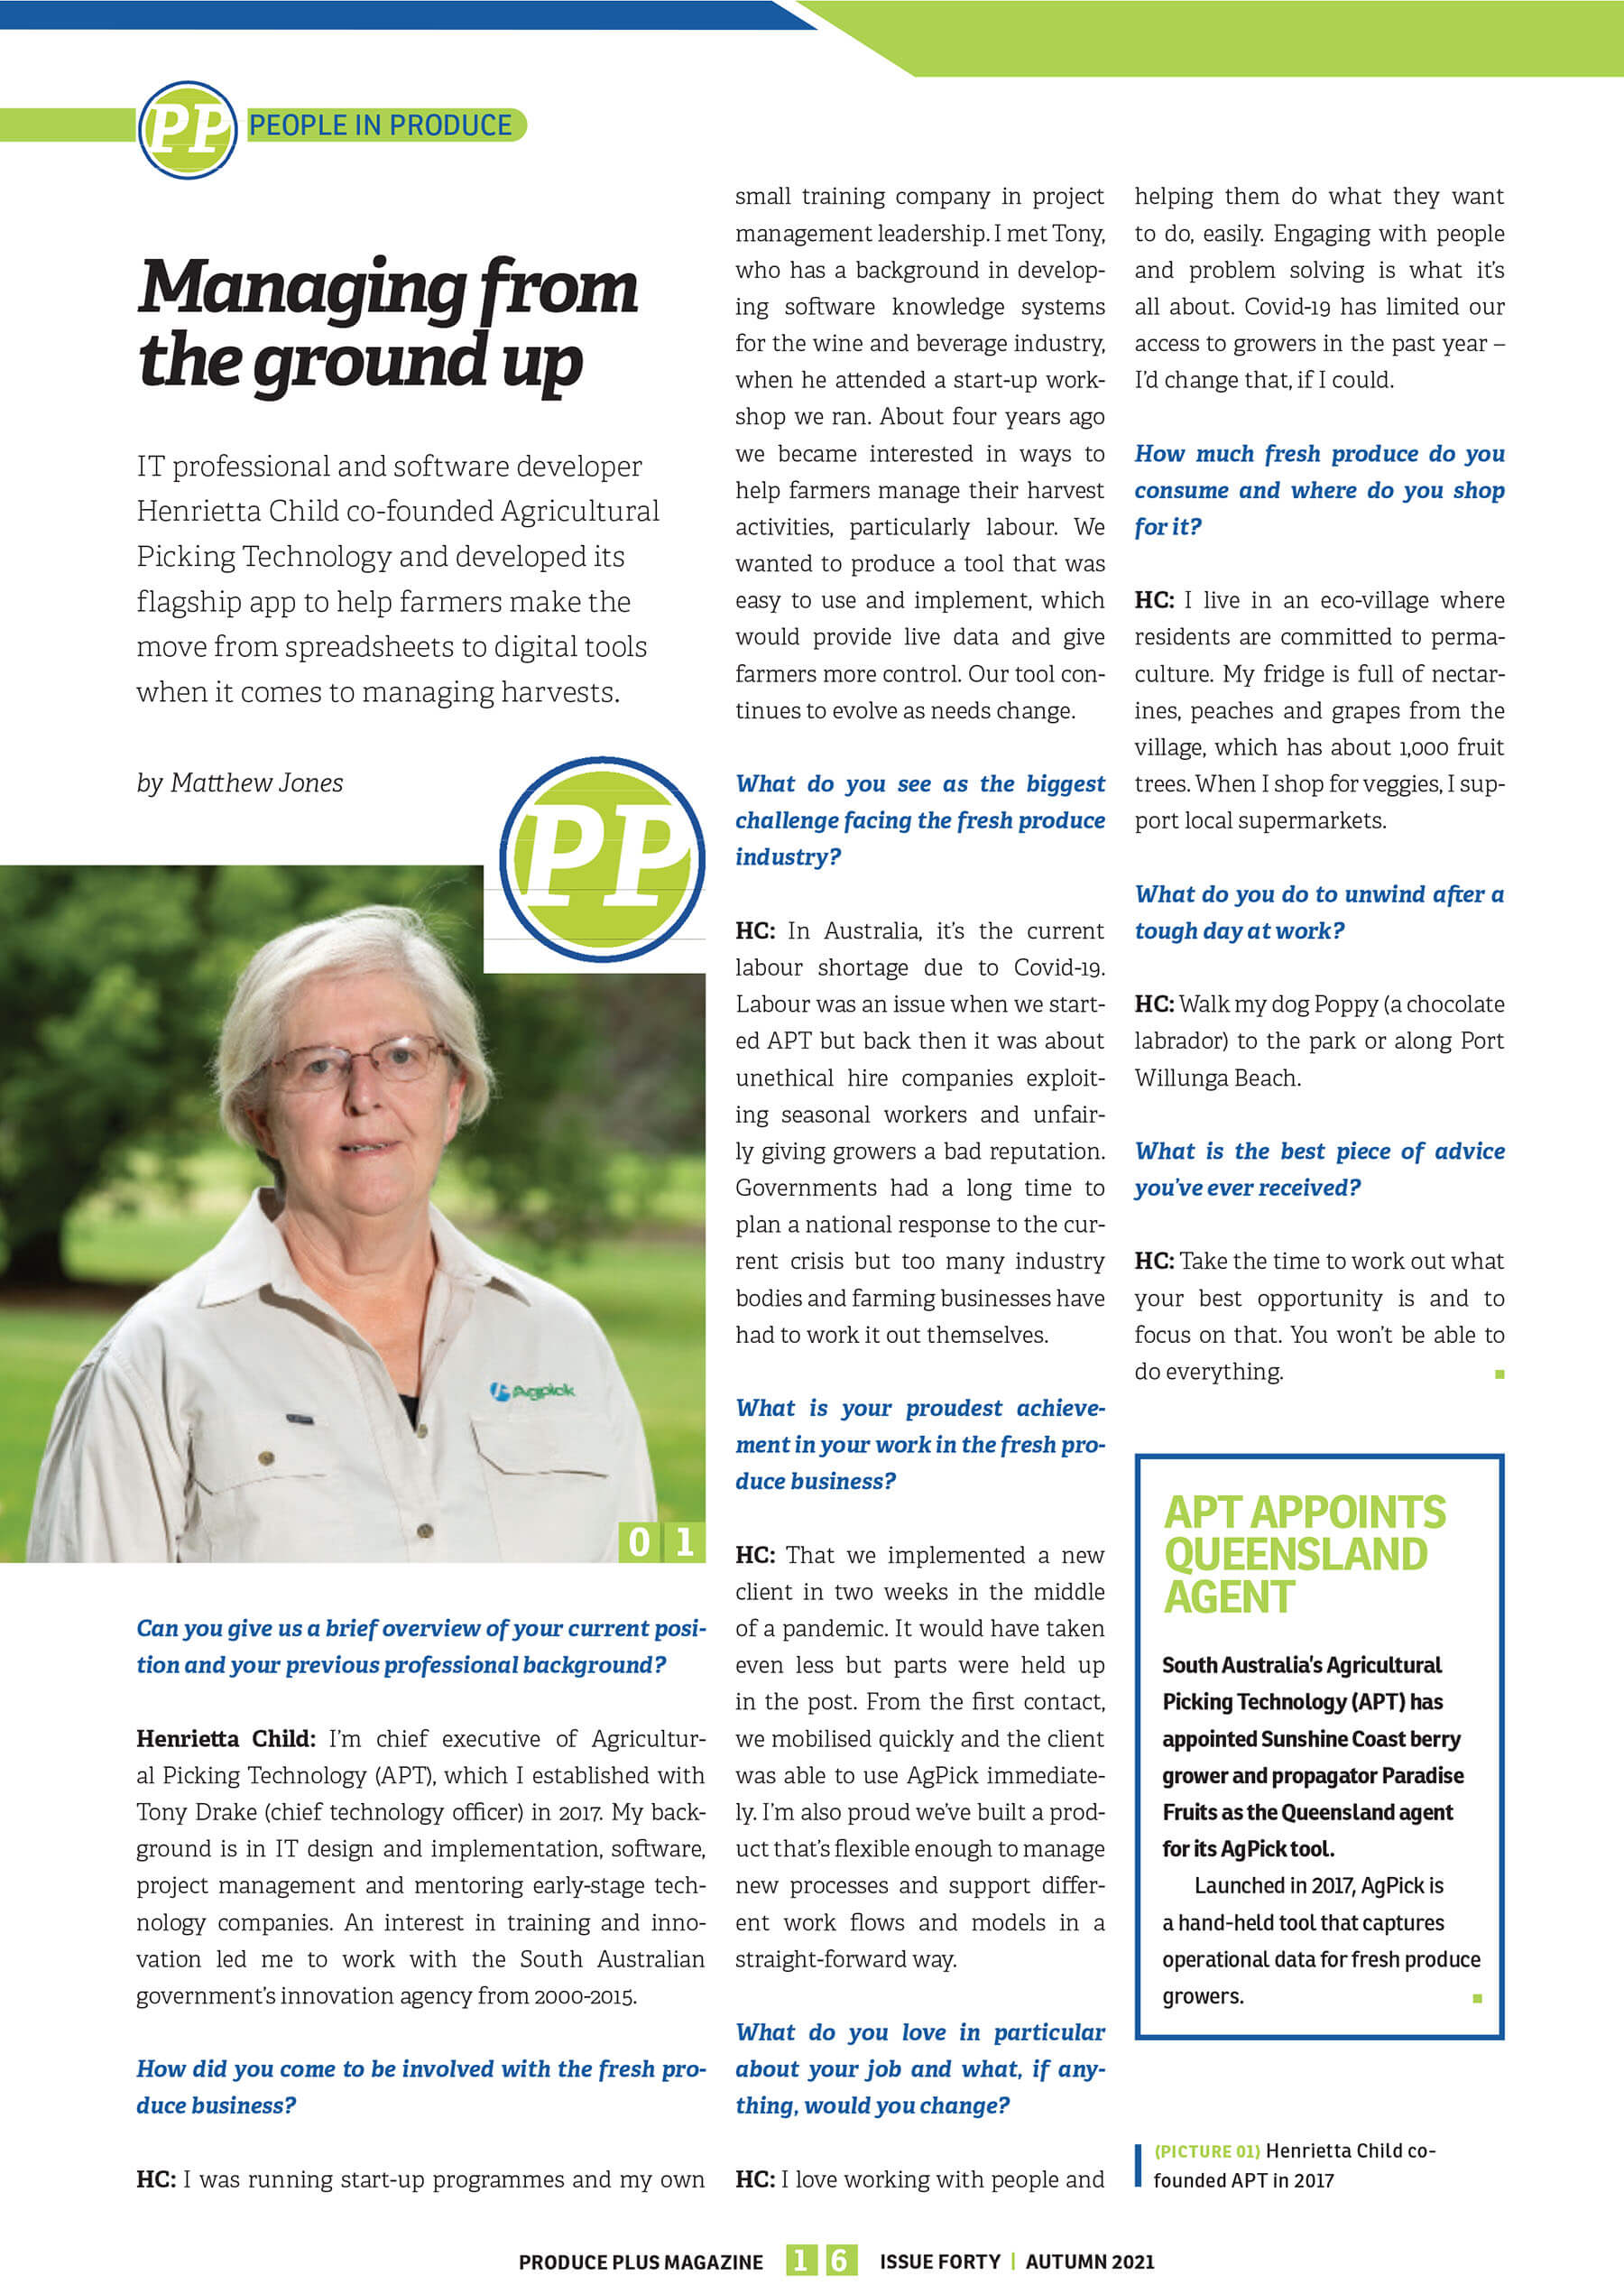 People in Produce - Managing from the ground up - AgPick